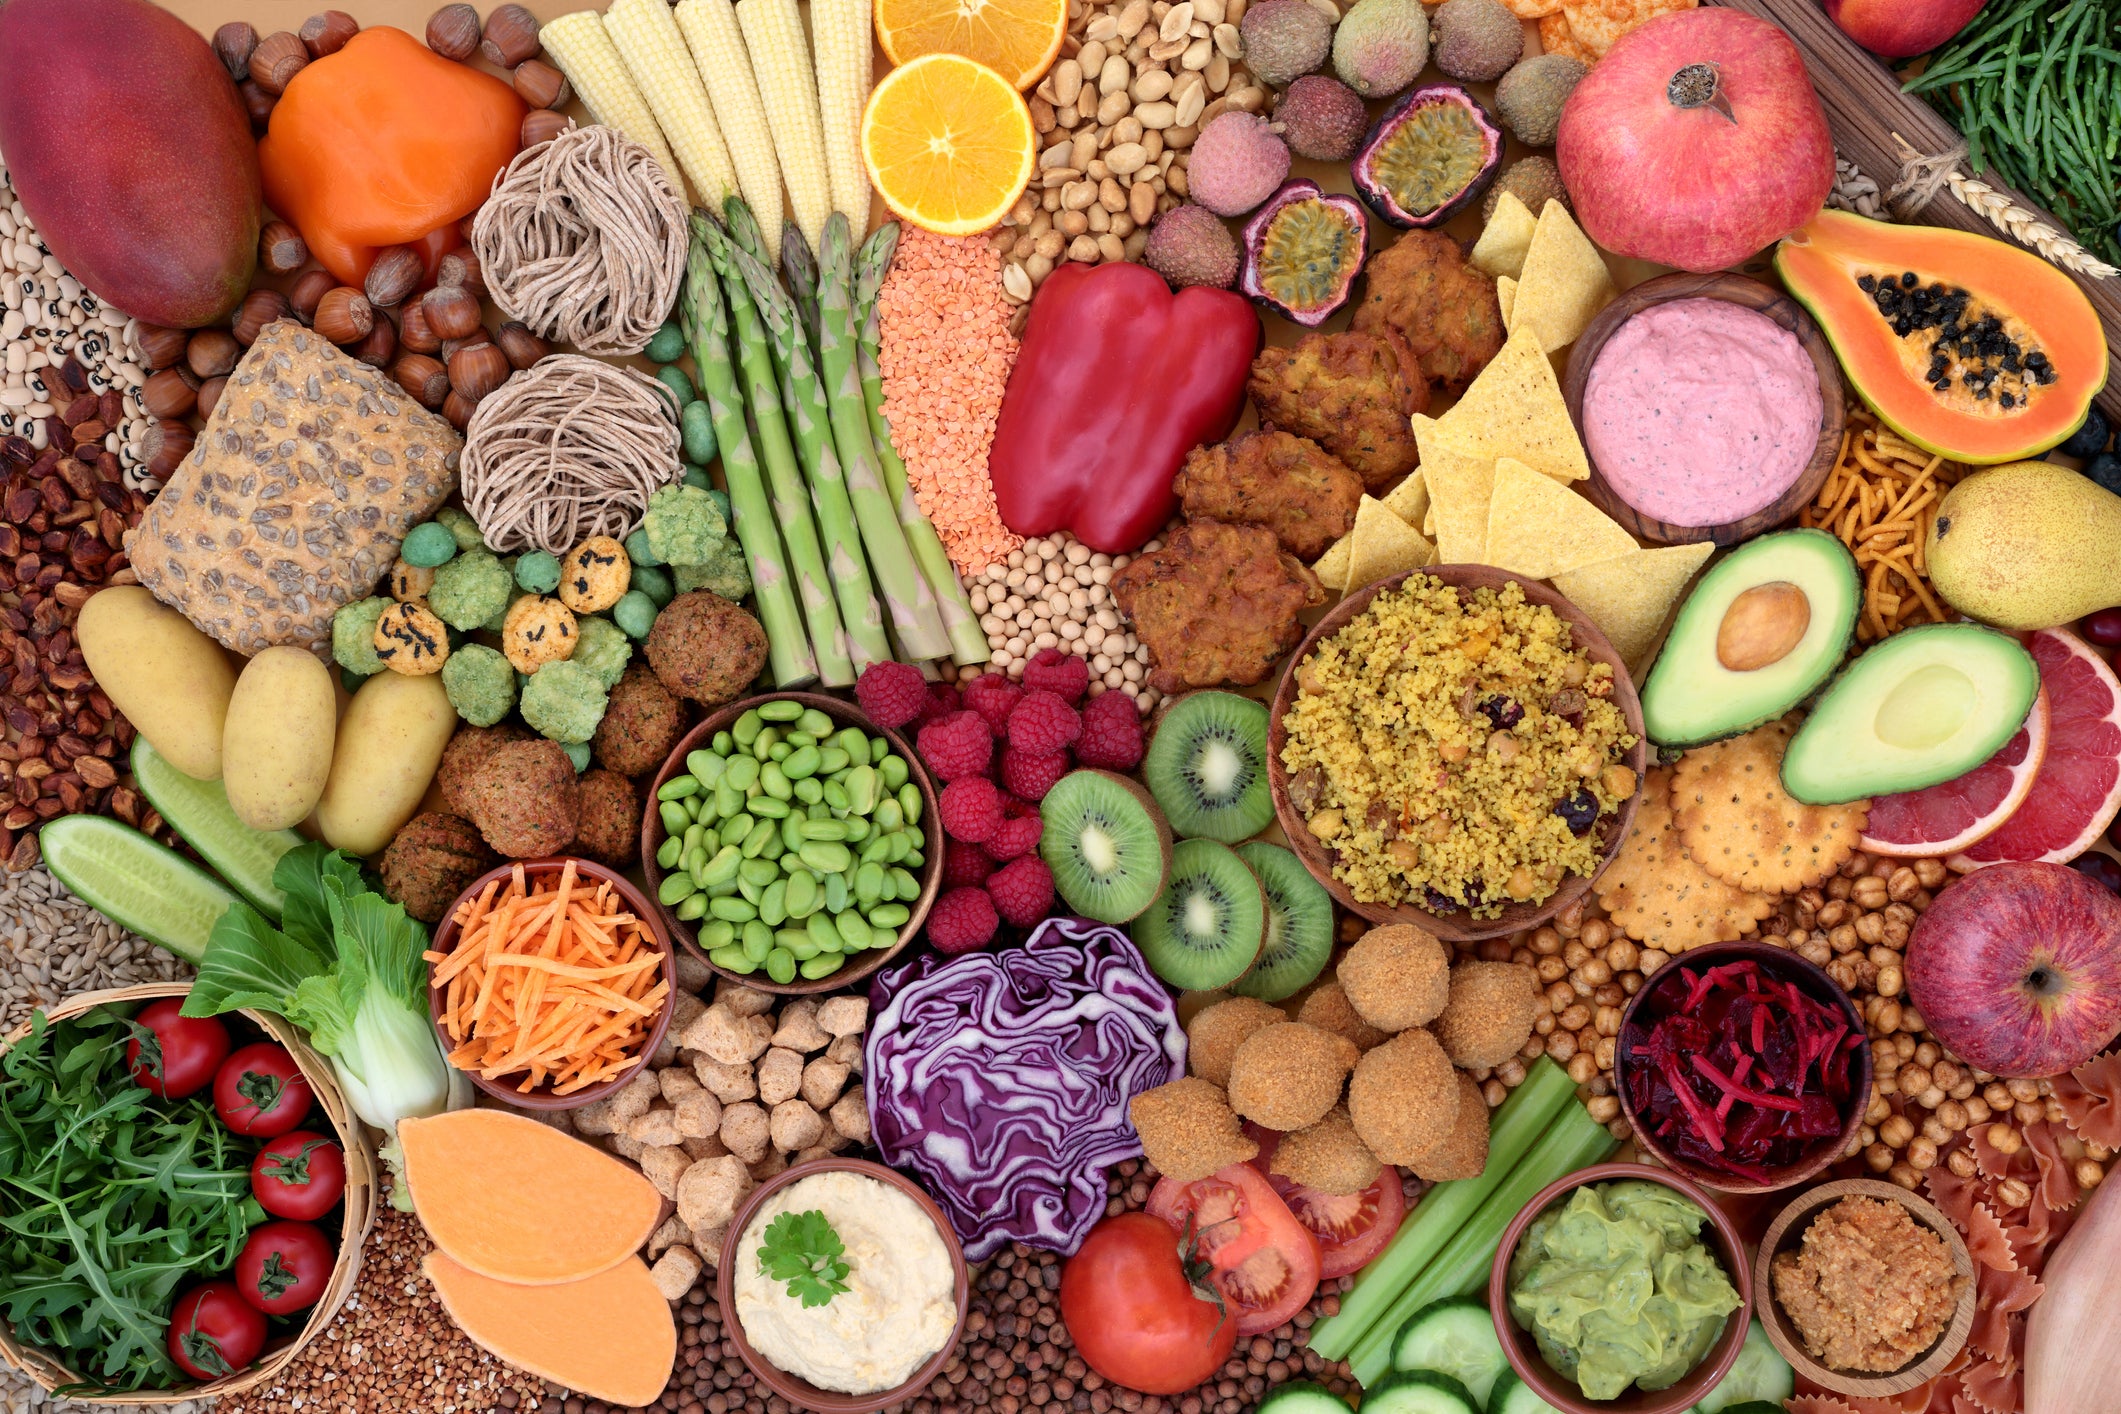 How to switch to a vegan diet, according to a nutritionist